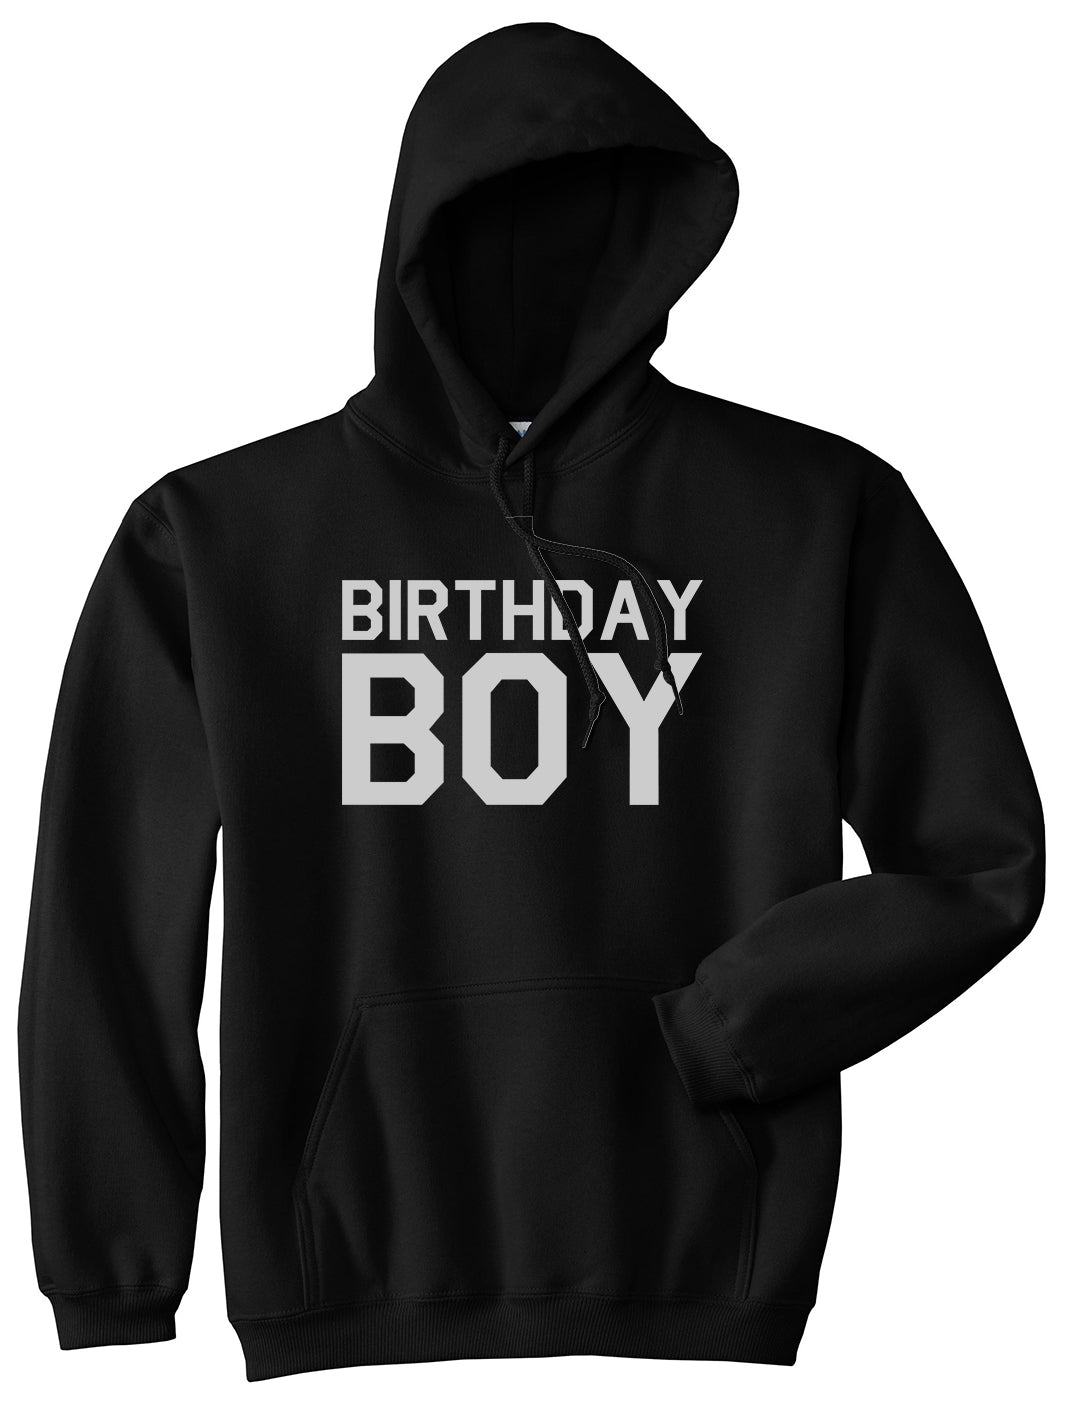 Birthday Boy Black Pullover Hoodie by Kings Of NY